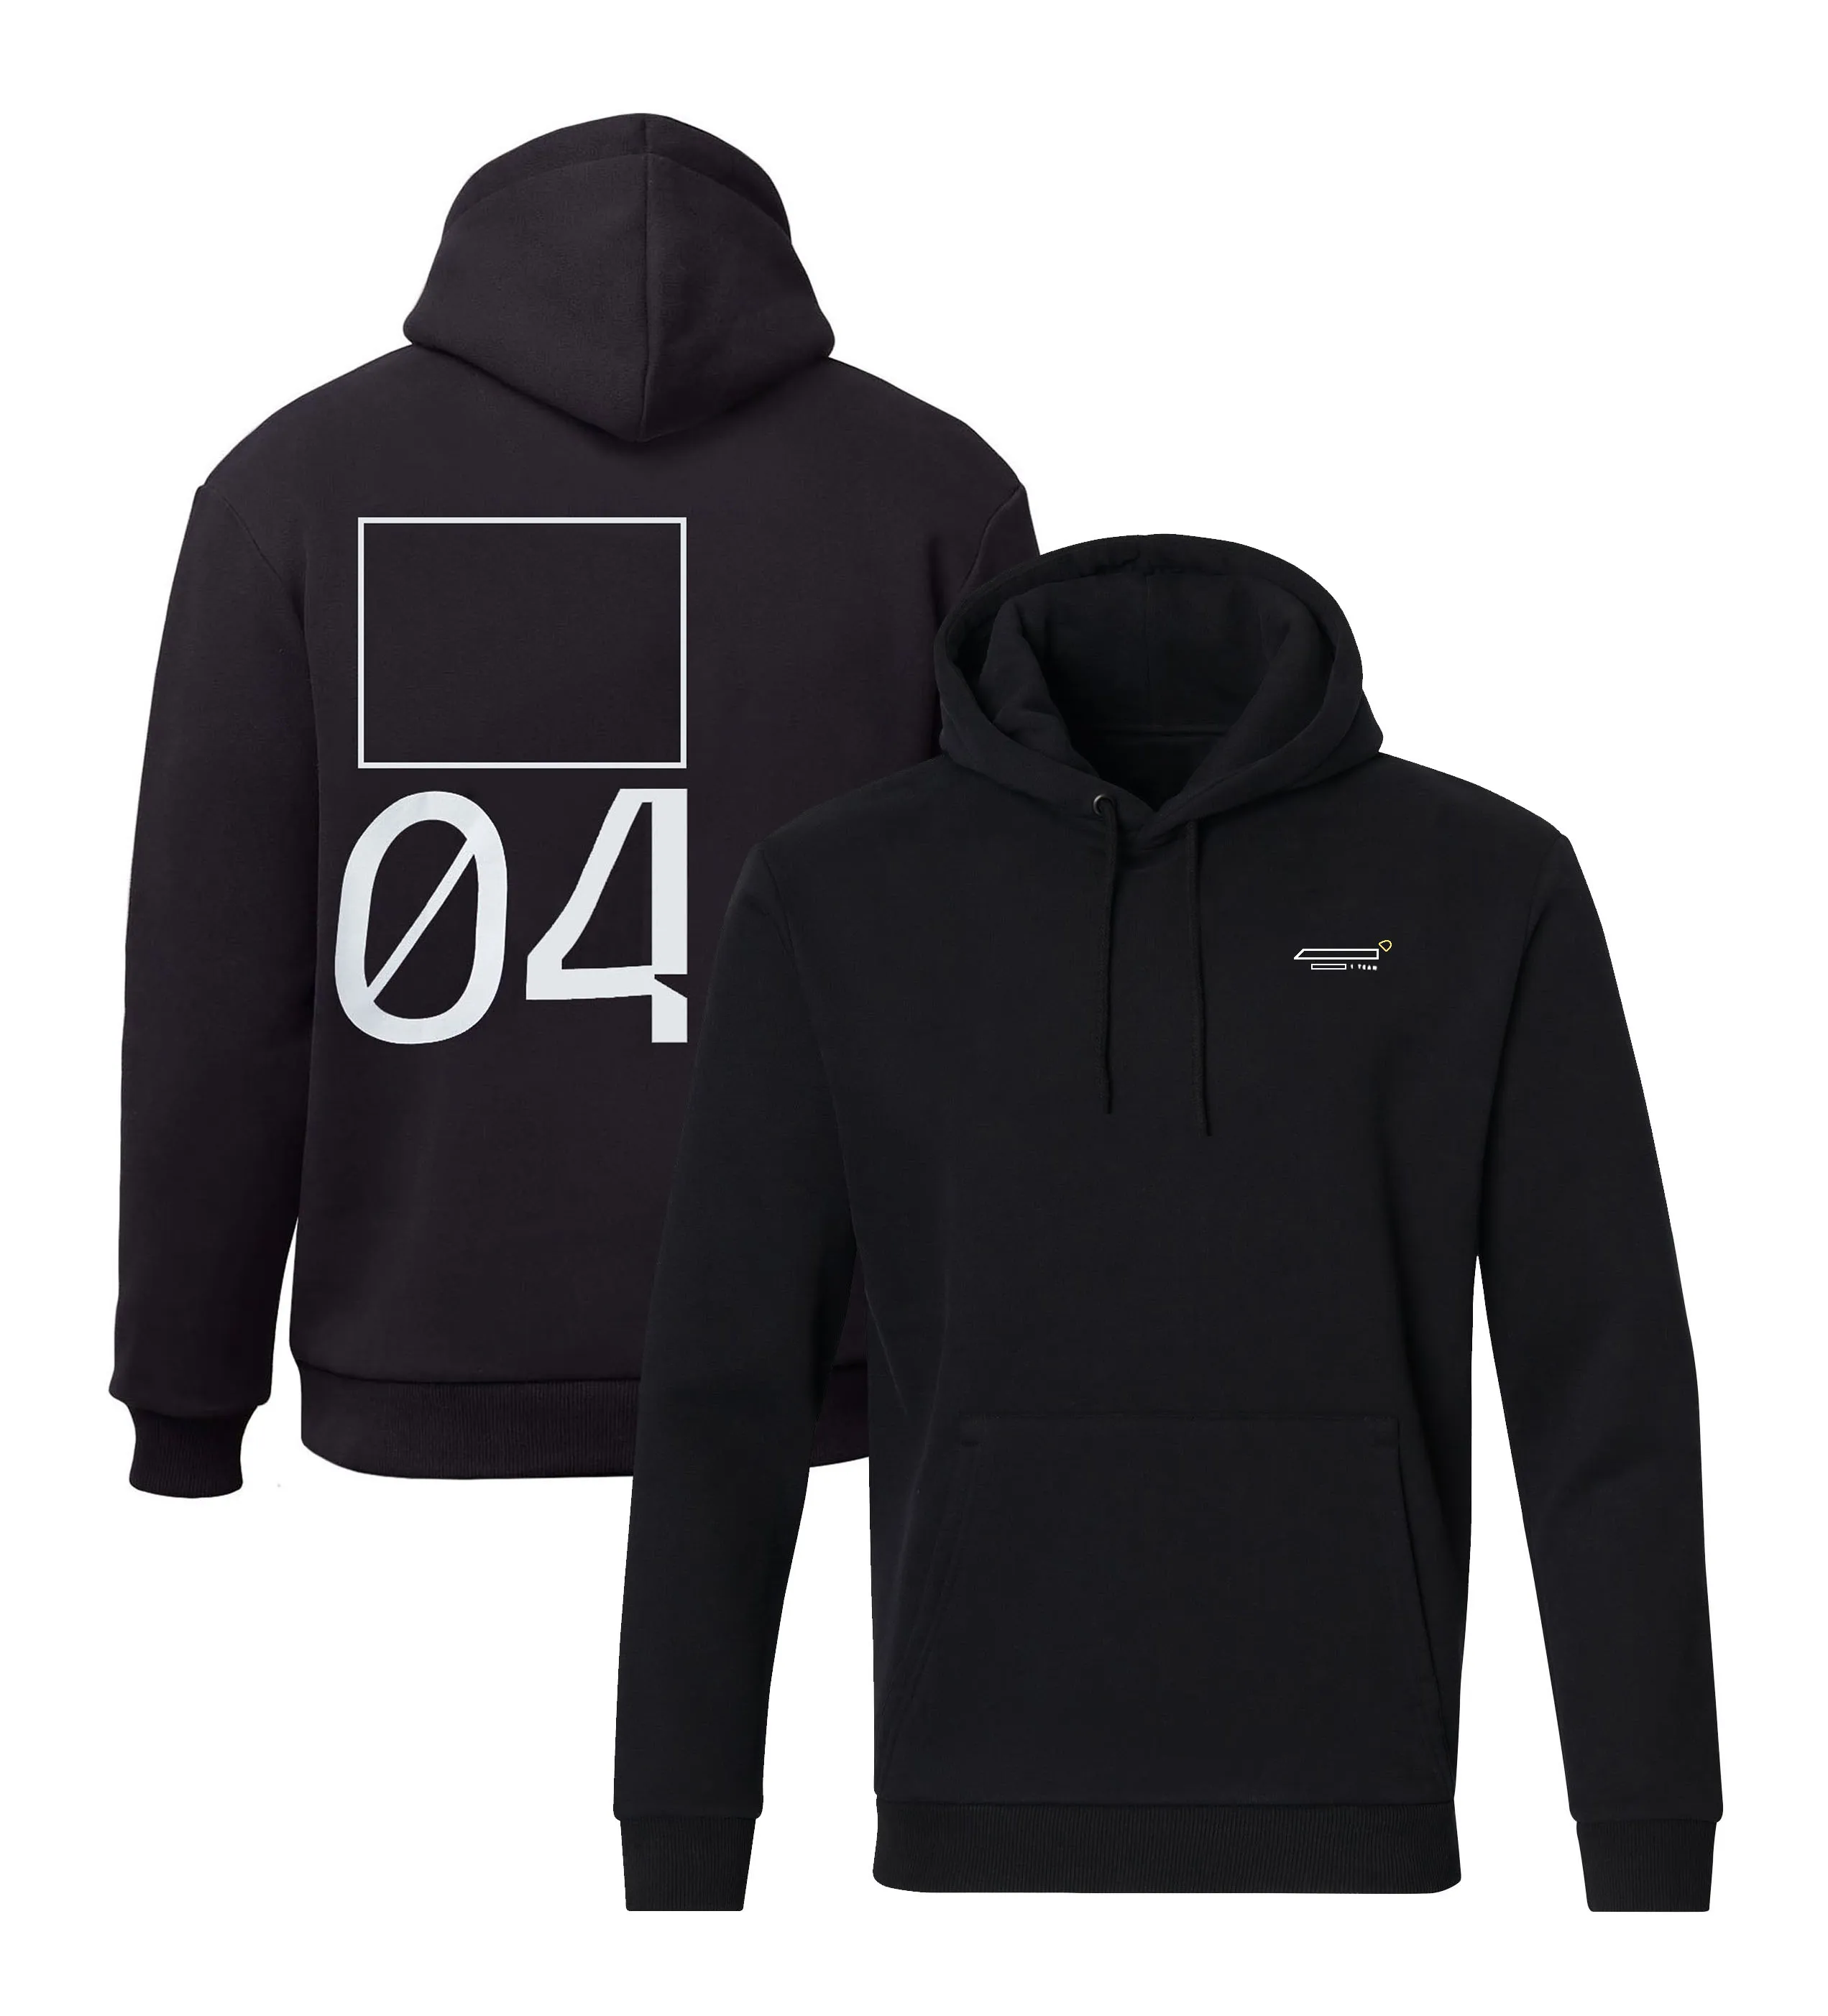 Autumn and winter f1 team racing suit formula one new product hoodie number custom plus size